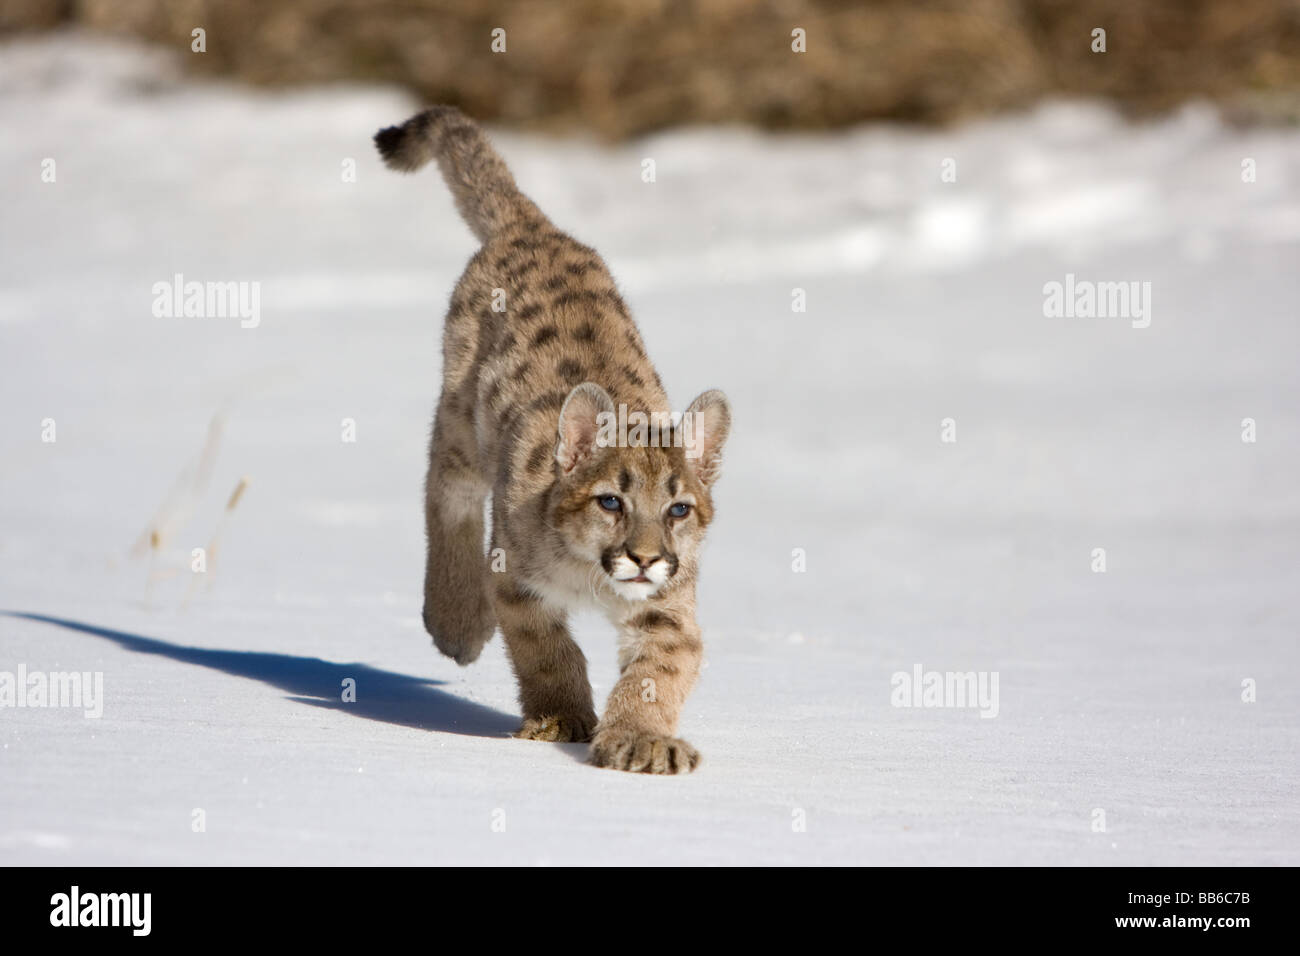 Young mountain lion, cougar, running in snow Stock Photo